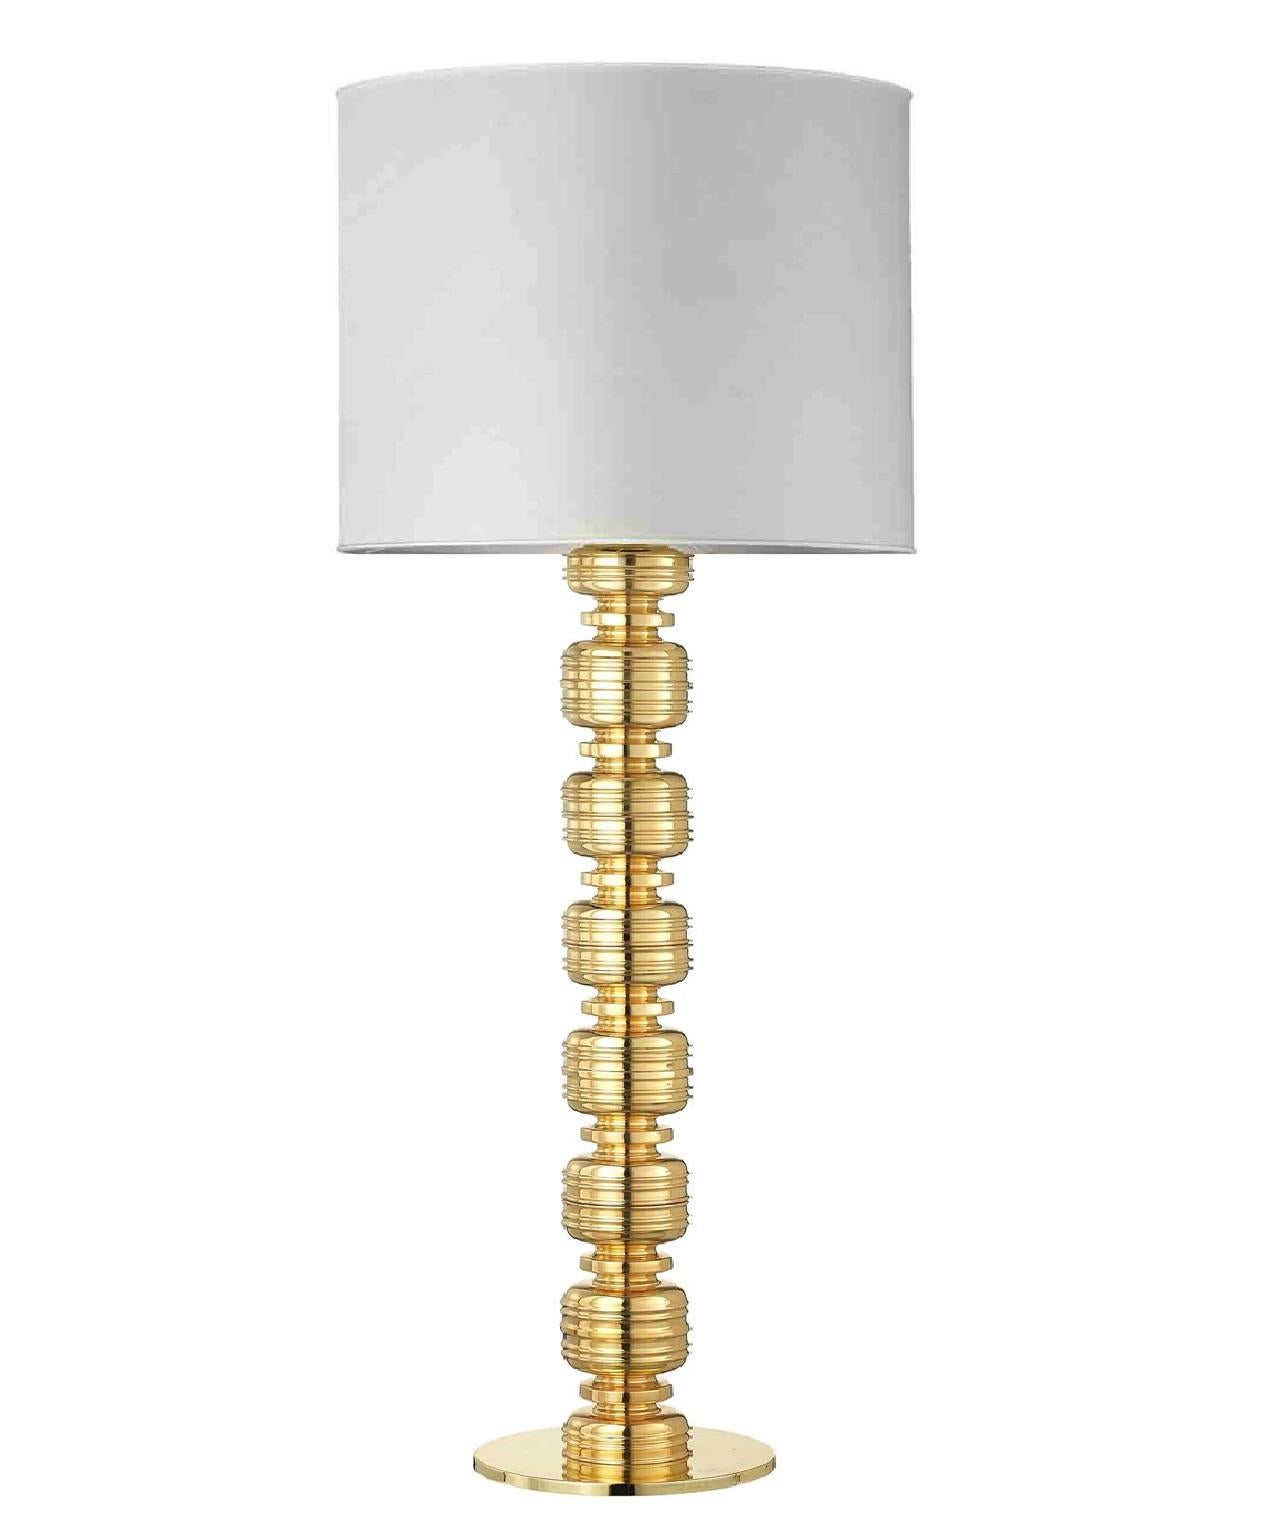 Ceramic lamp THEA 3 - code LTH180 handcrafted in 24-karat gold 
with cotton lampshade

measures: 
Height 180.0 cm., diameter 40.0 cm.

  